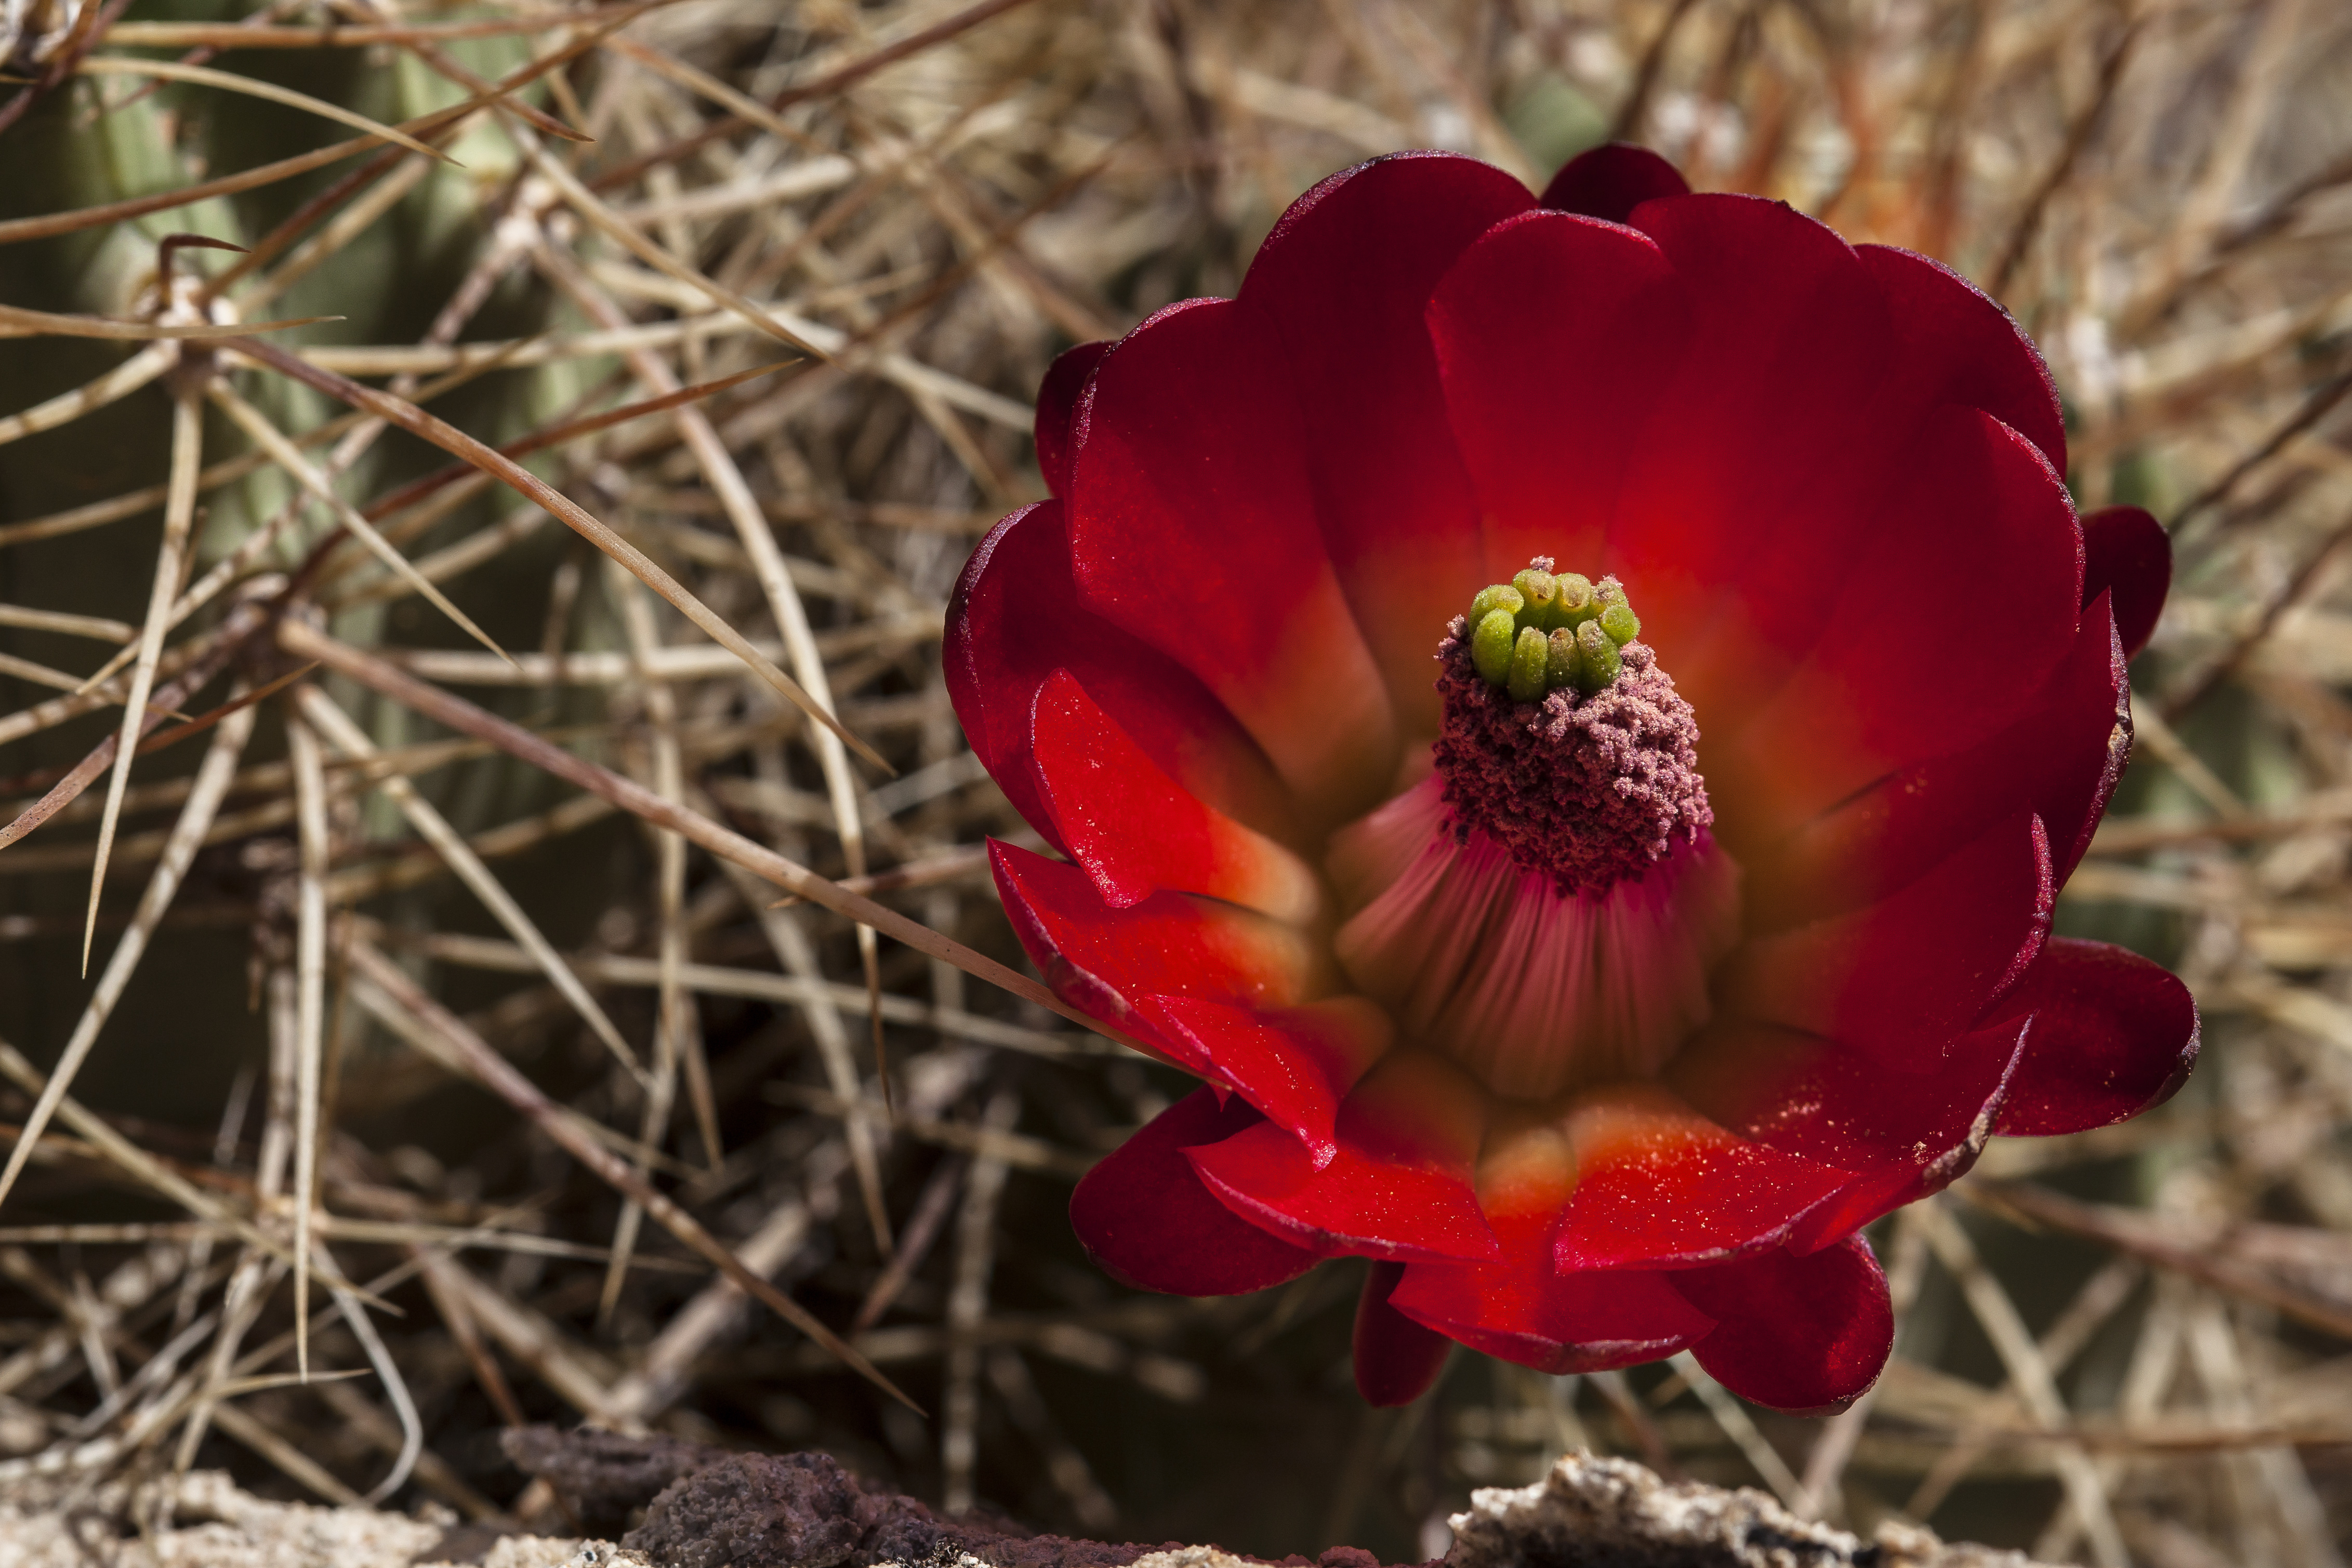 a bright red cactus flower